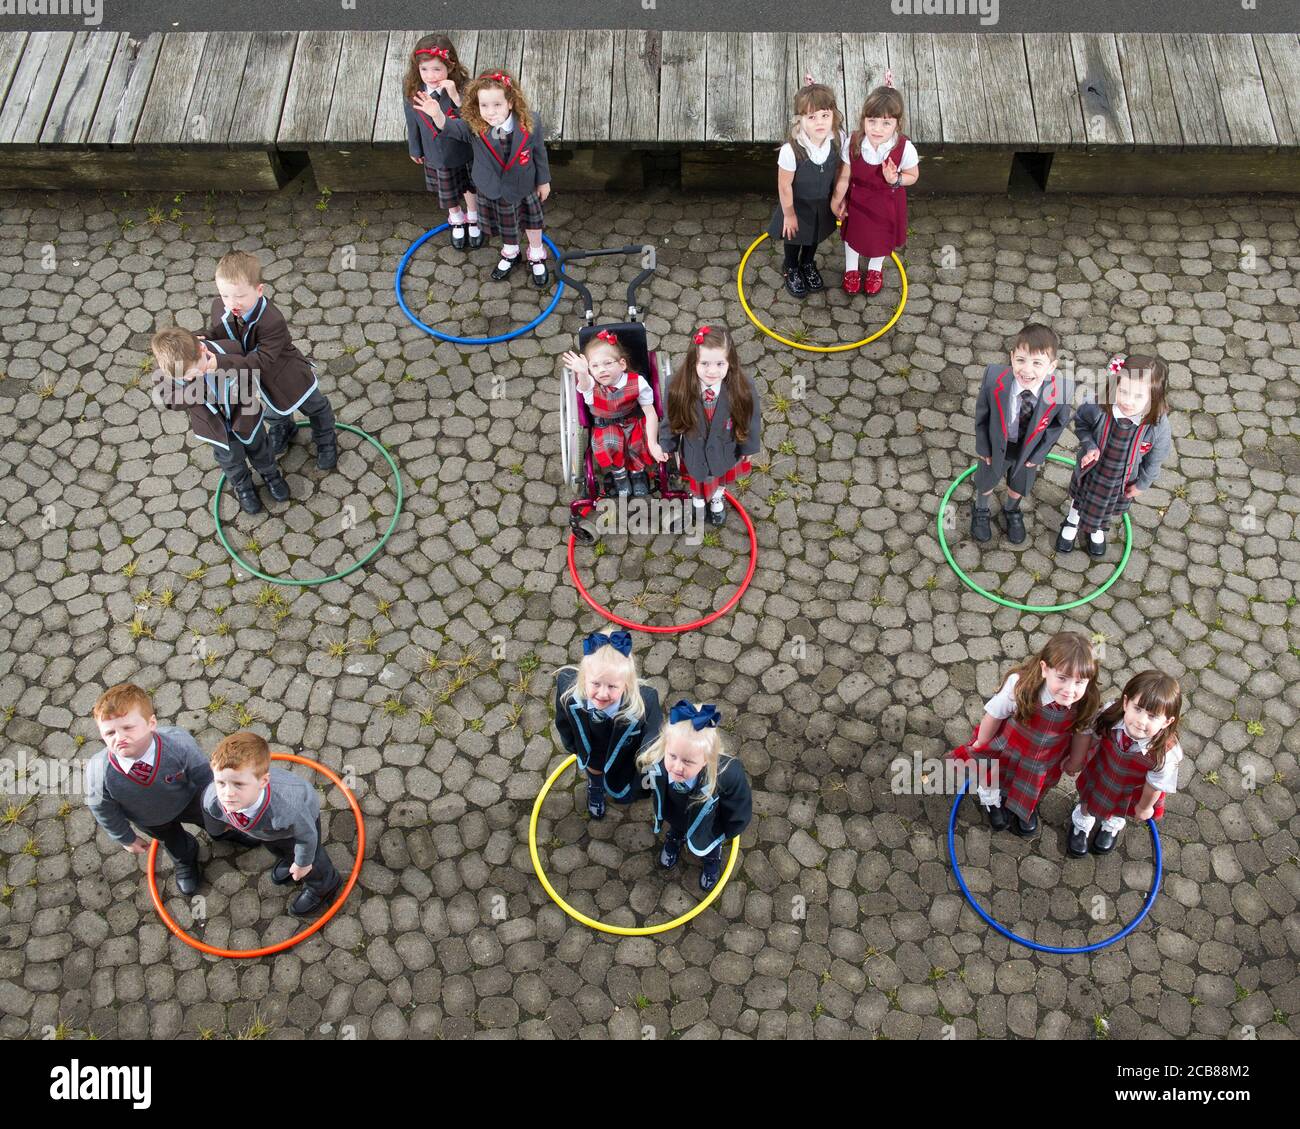 Port Glasgow, Scotland, UK. 11th Aug, 2020. Pictured: Eight sets of twins start school in Inverclyde Eight sets of twins are set to start their first day of school in Inverclyde. Names: (top row L-R) Eva & Iona Metcalf; Lola & Malena Perez Malone; (middle row L-R) Ben & Stuart Miller; (bottom row L-R) Connor & John Branchfield; Alice & Penny Beer; Aria & Isla McLaughlin. Credit: Colin Fisher/Alamy Live News Stock Photo